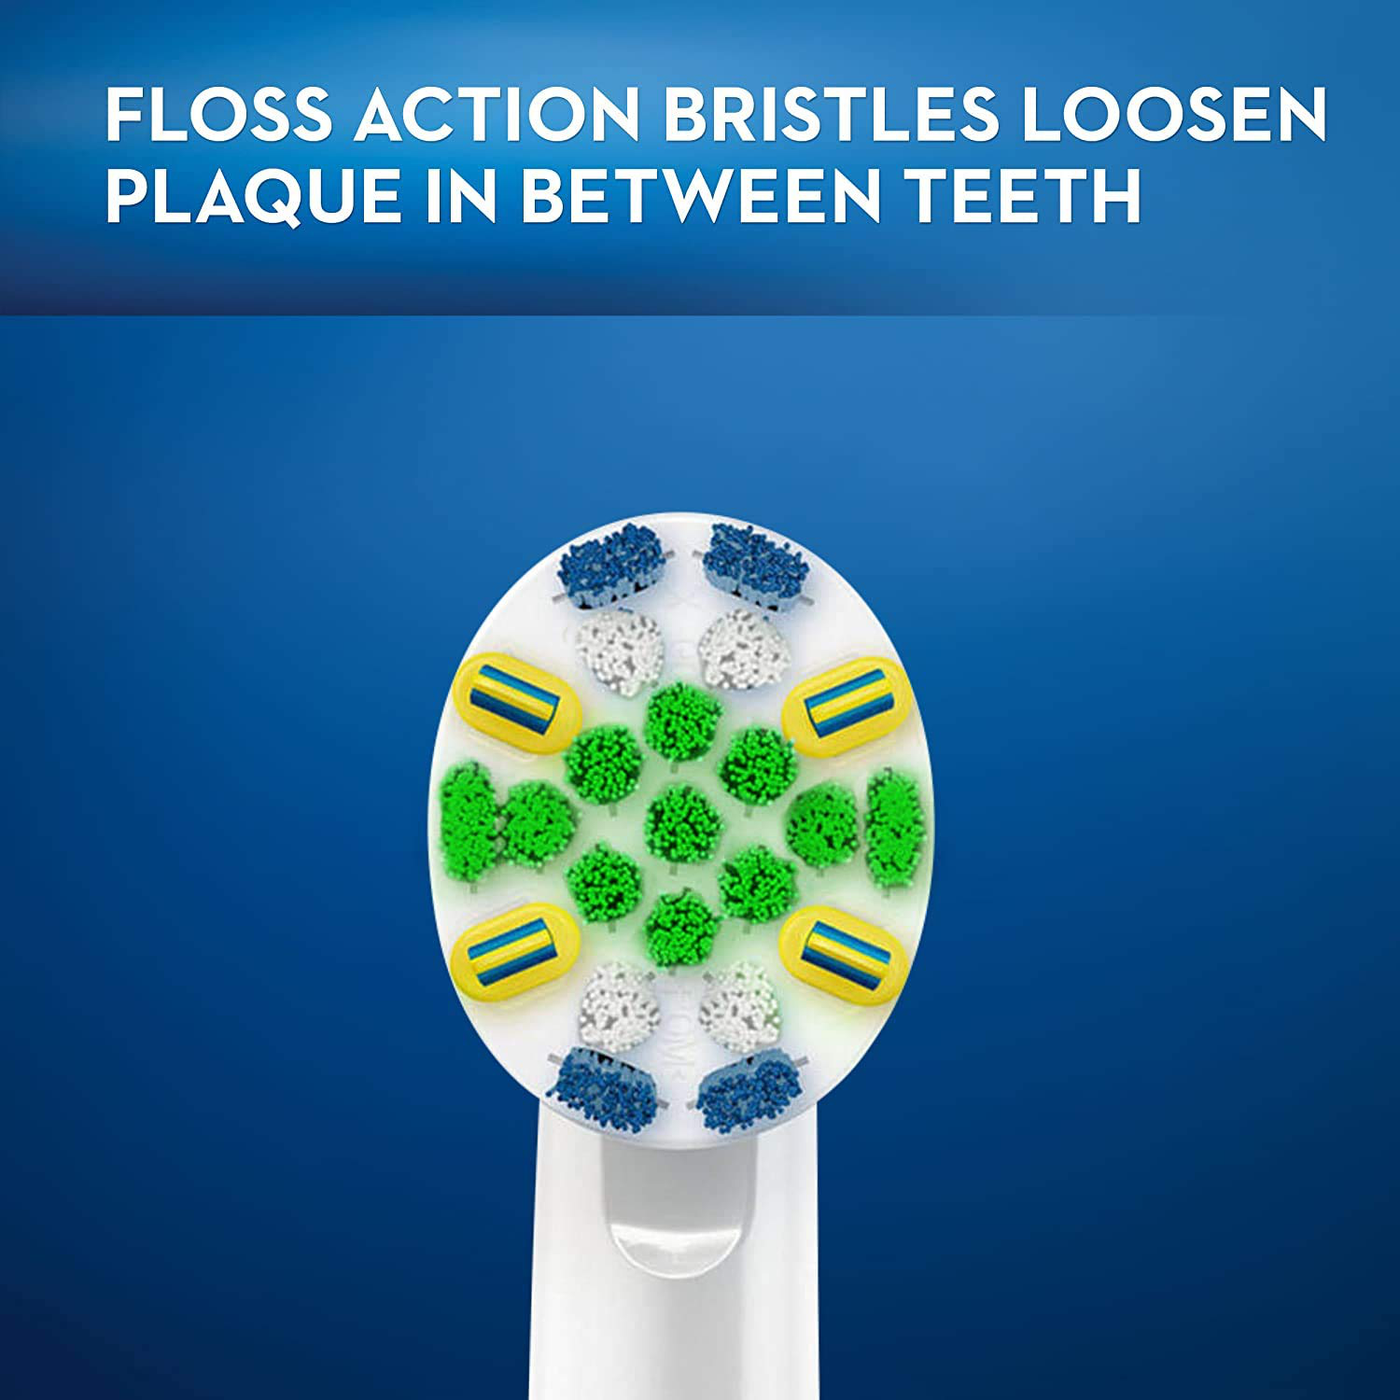 Oral-B FlossAction Toothbrush Refill Brush Heads, 5 Count